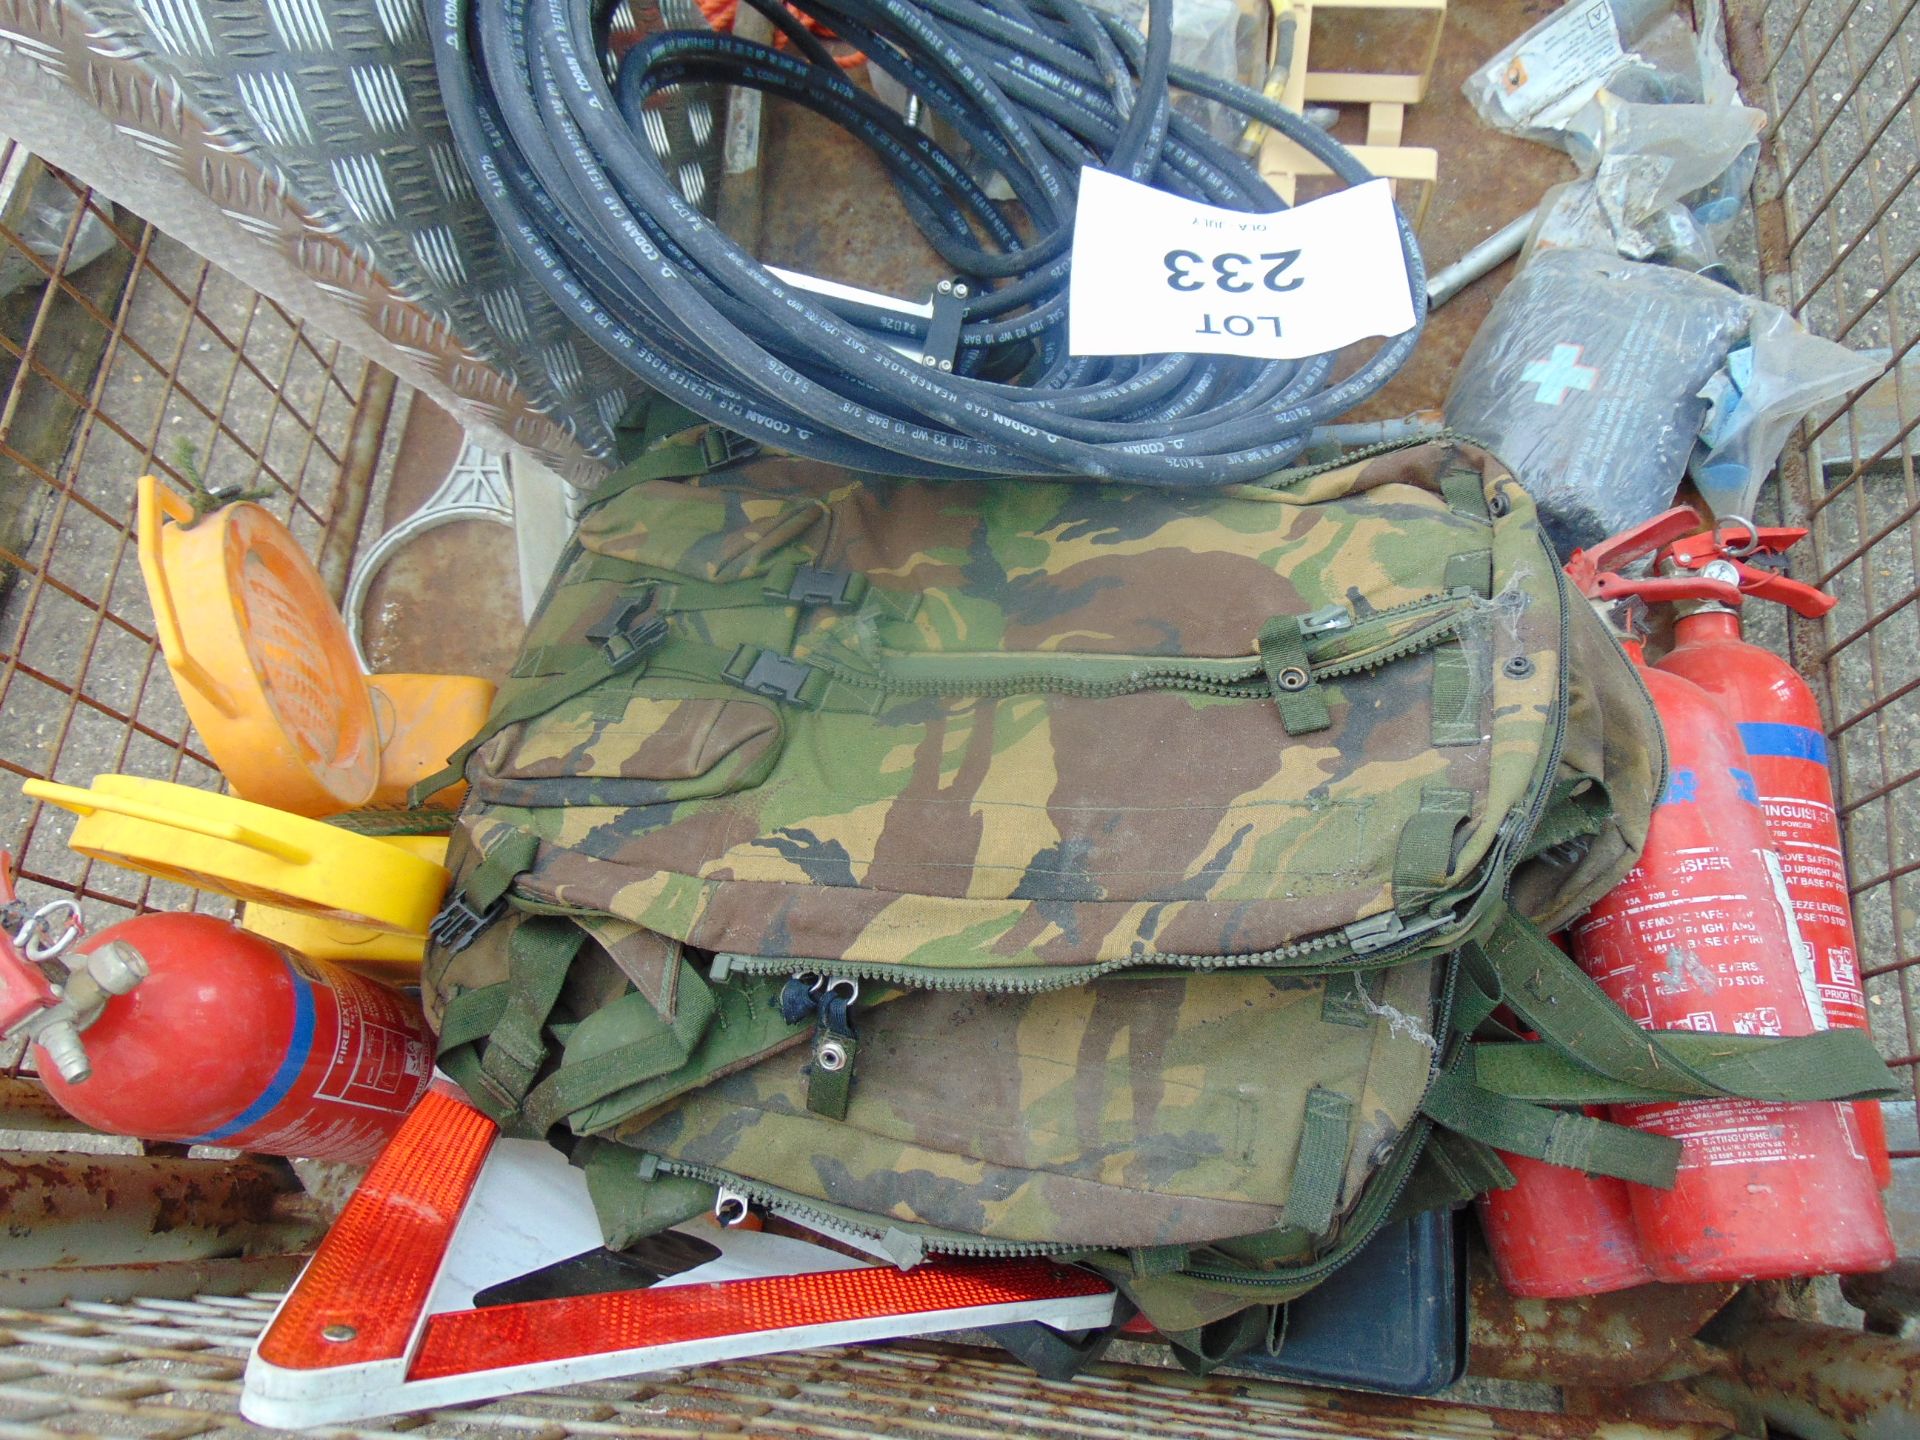 1 x Stillage Spares inc Camo packs, Axes can holders, Cable, Air Lines etc - Bild 3 aus 3